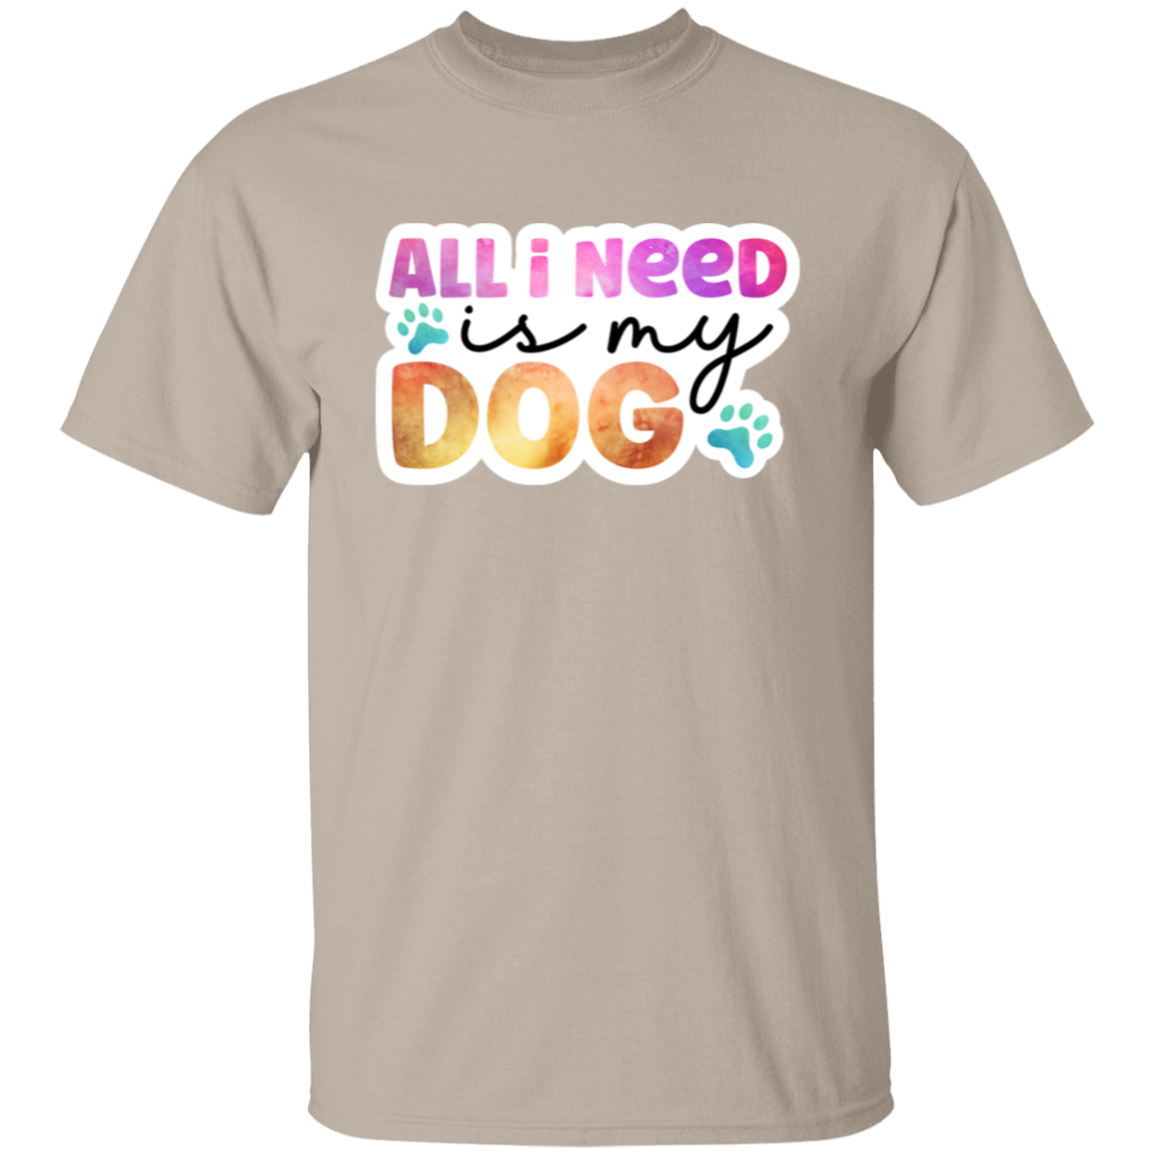 All I Need is my Dog T-Shirt